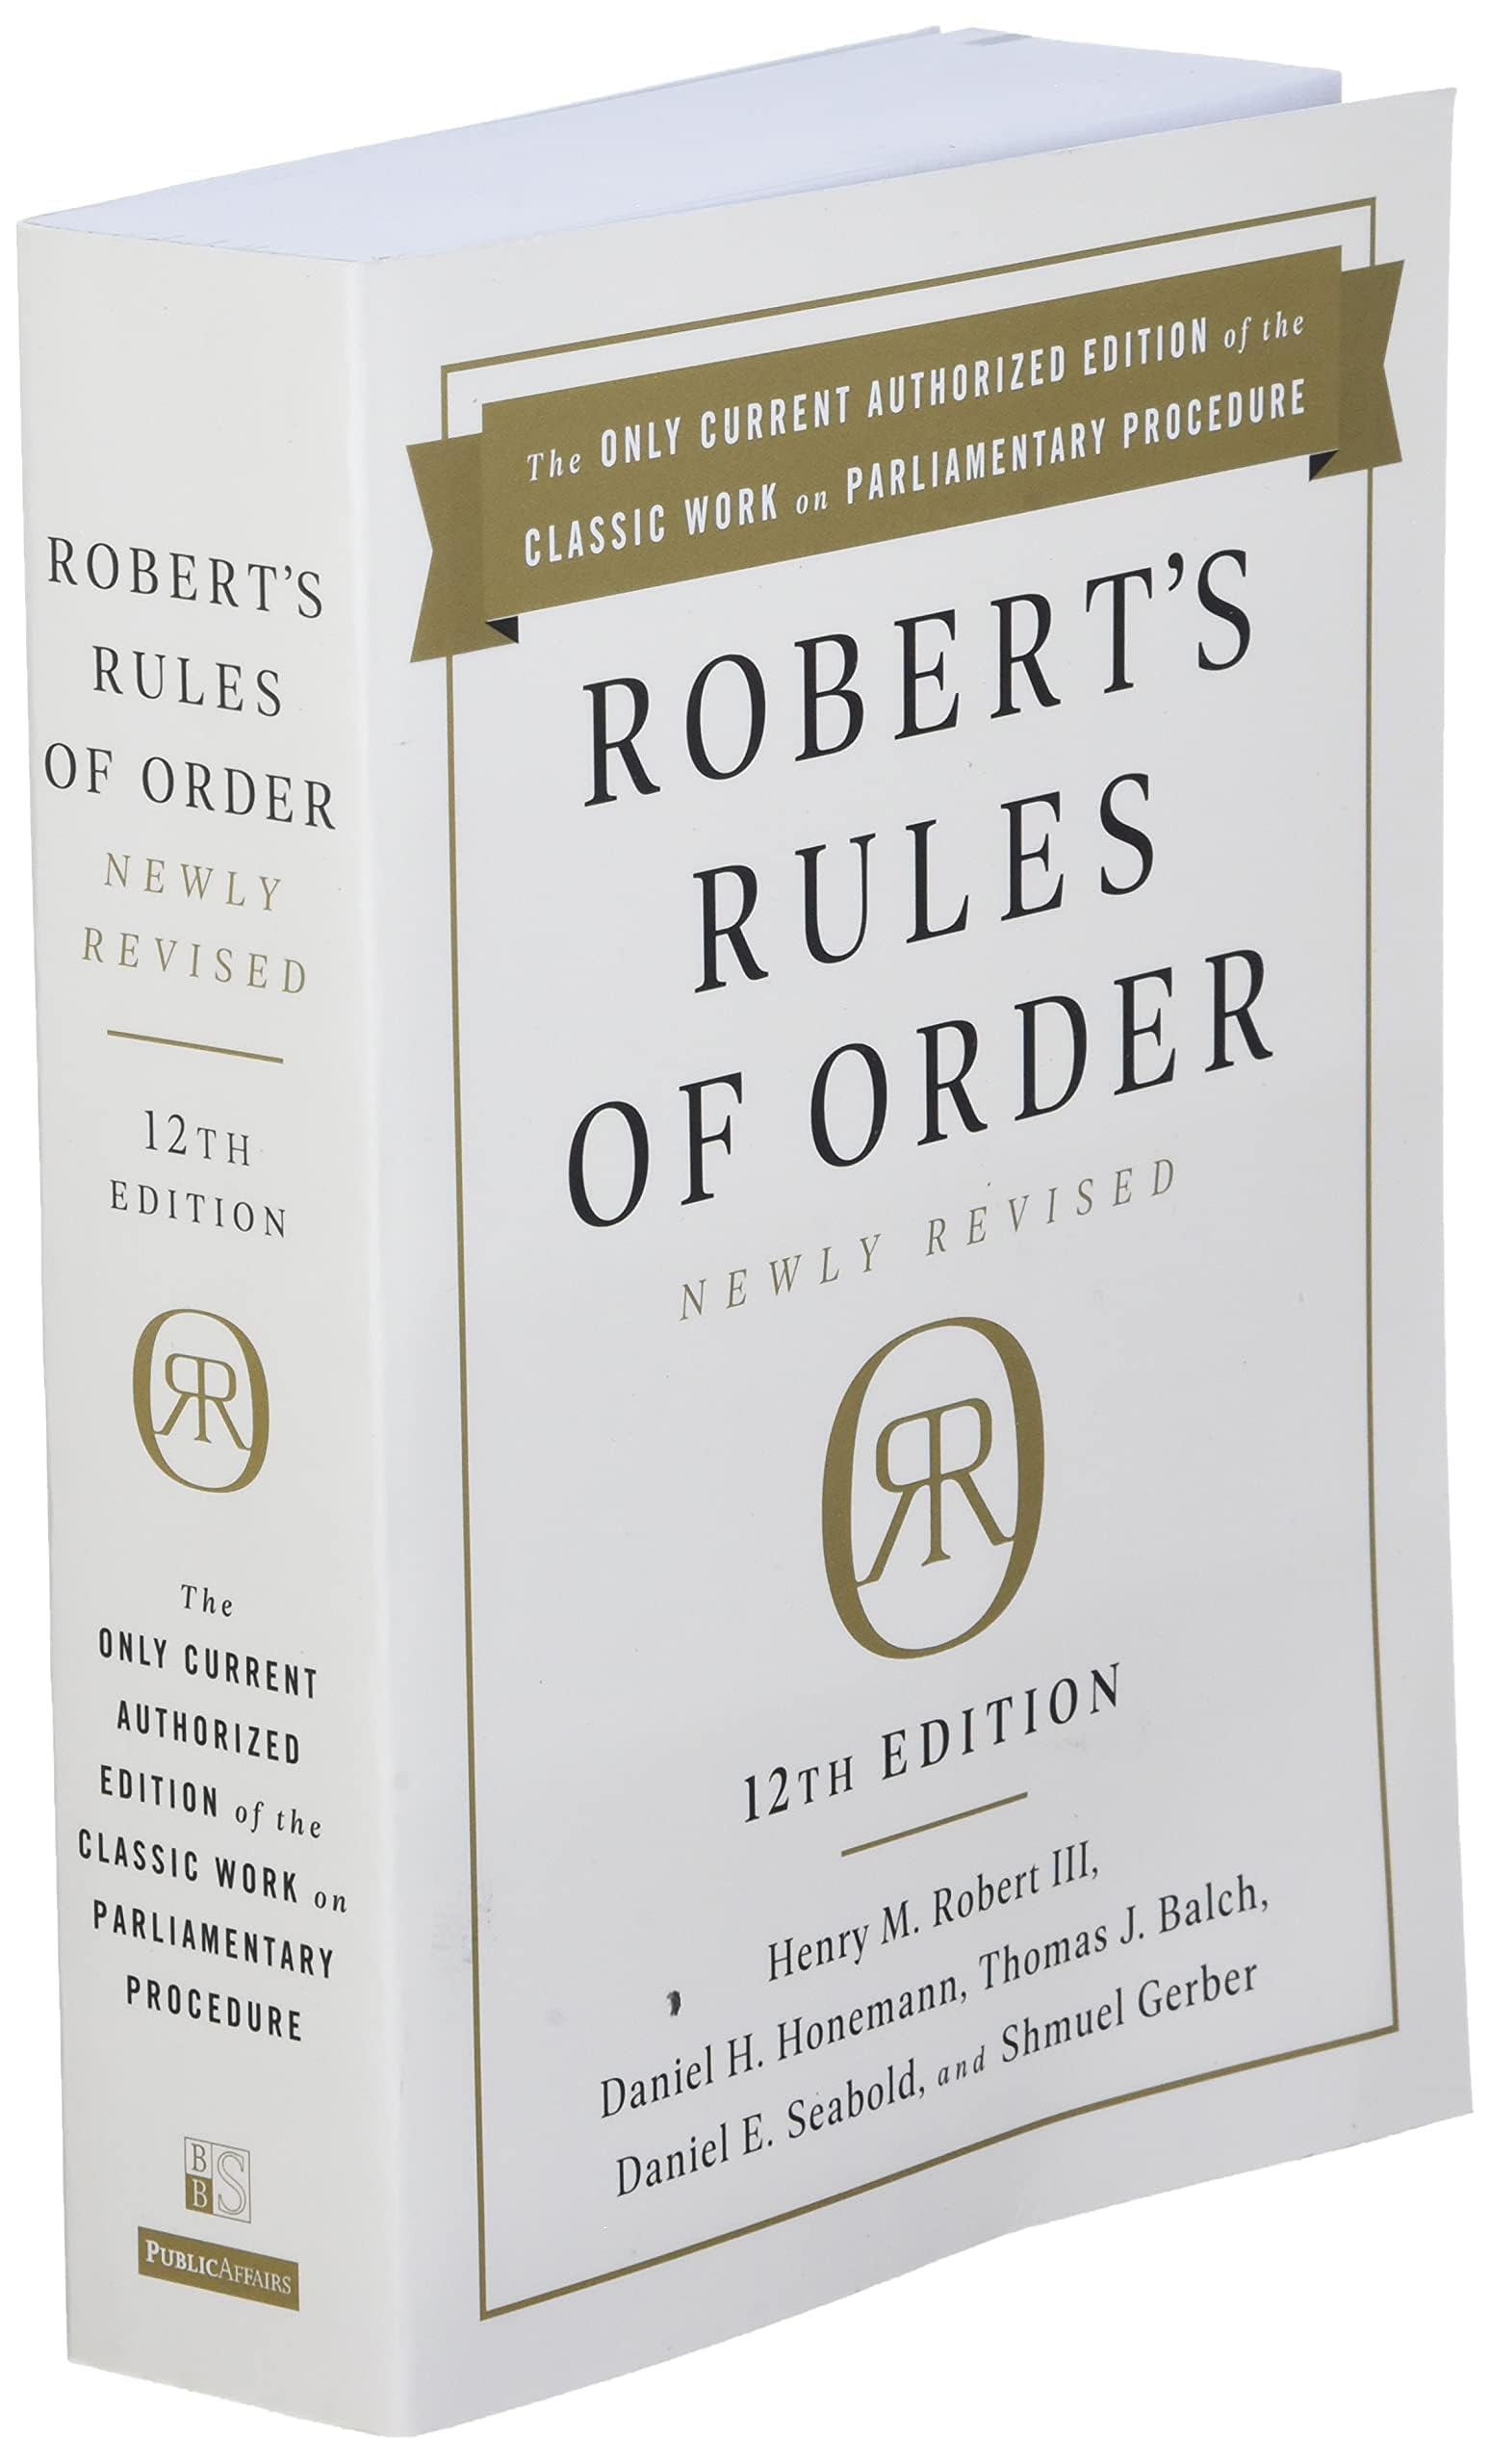 Robert's Rules of Order Newly Revised, 12th edition